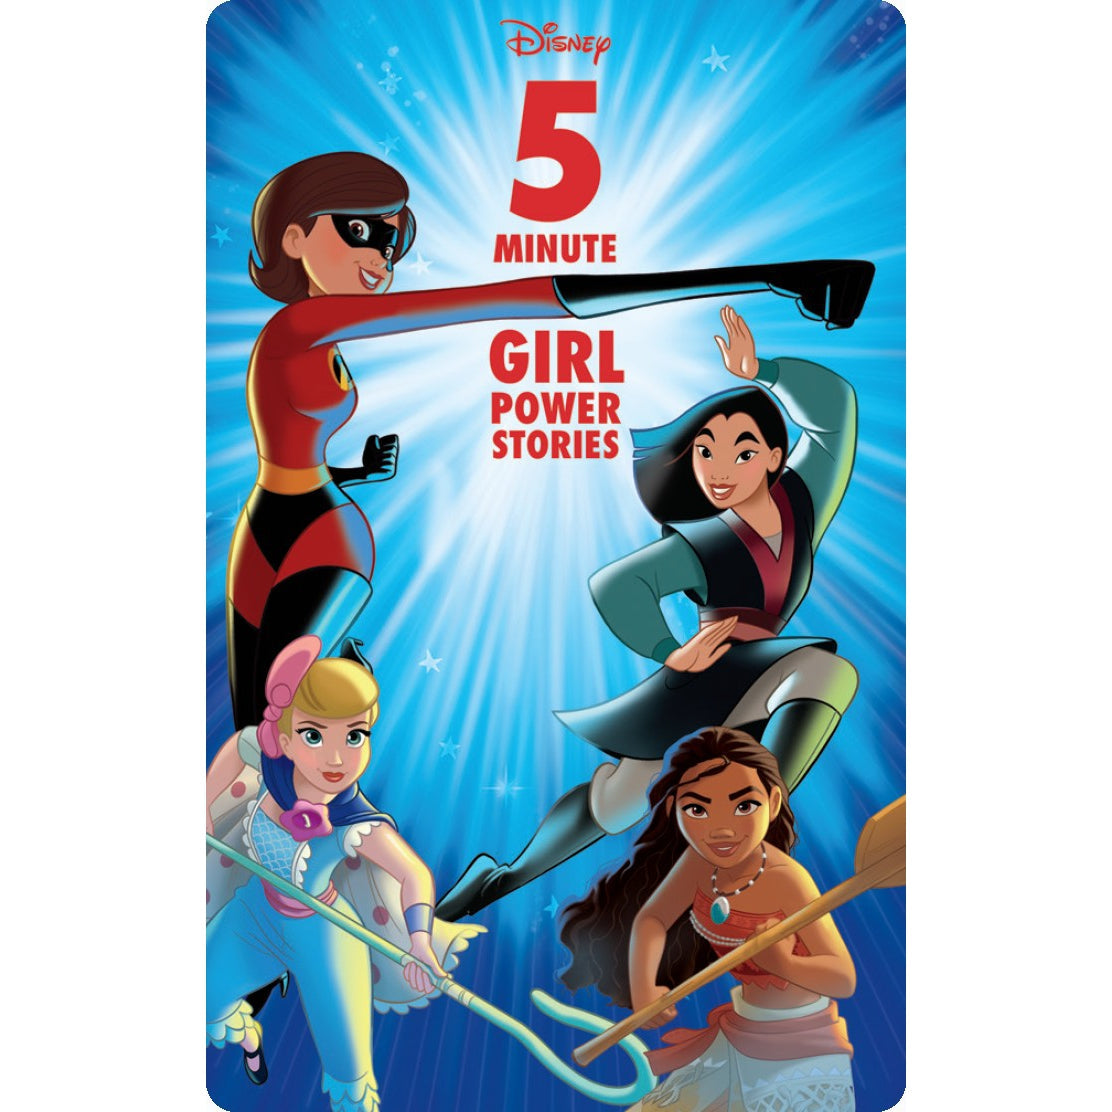 Yoto Card - Disney's 5 Minute Girl Power Stories - Child Friendly Audio Story Card for the Yoto Player